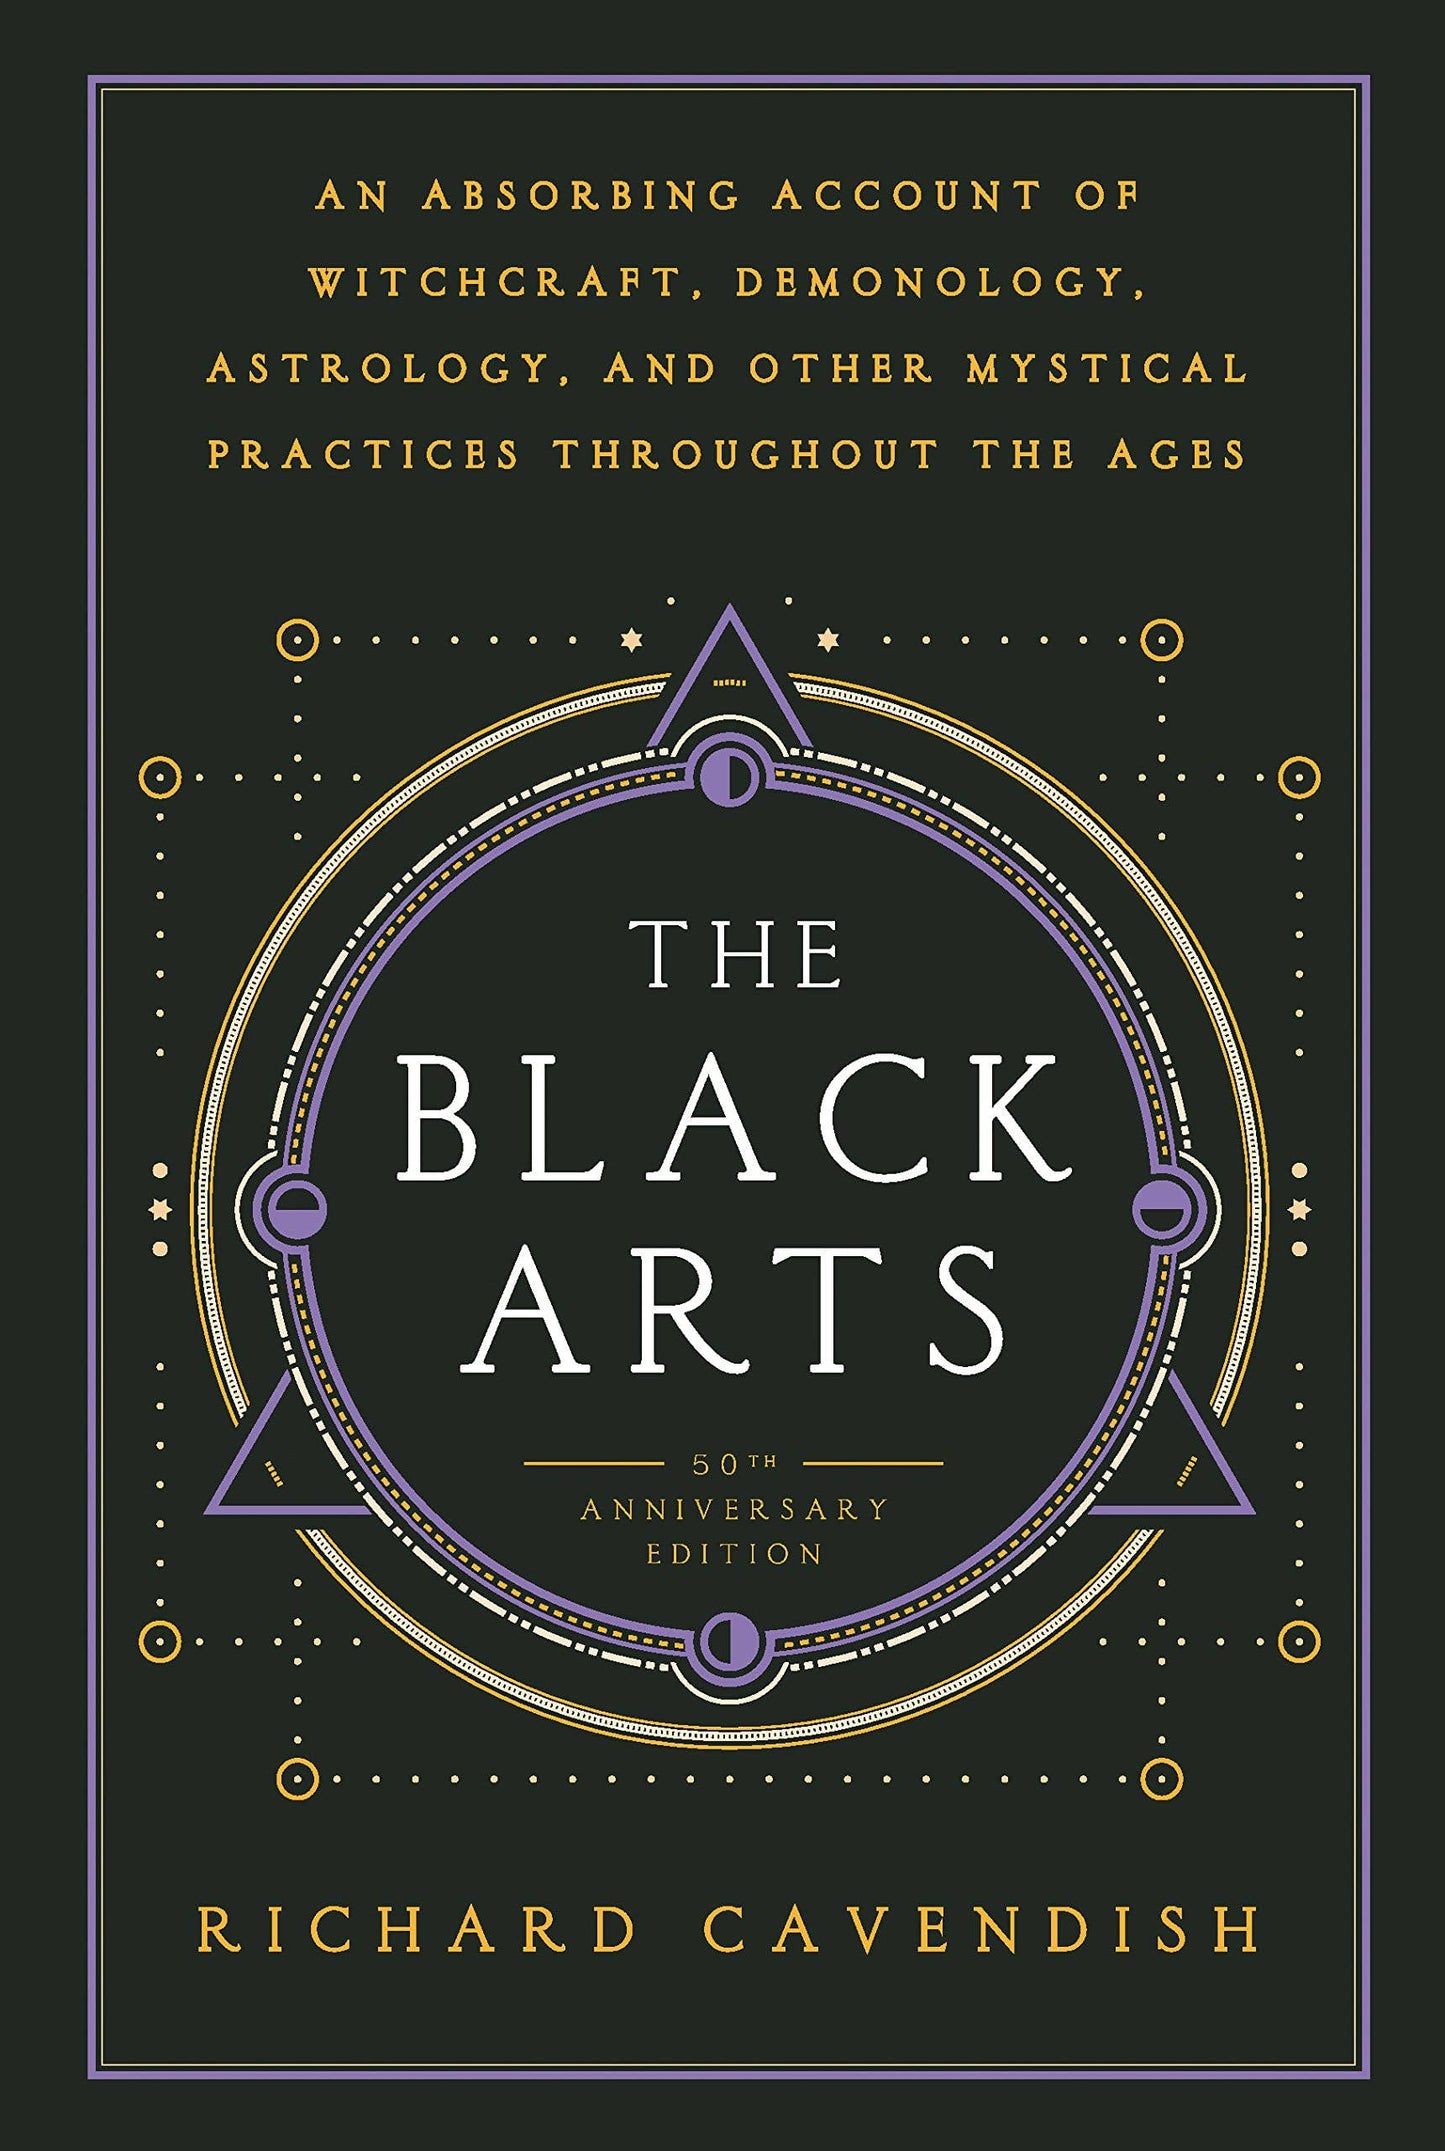 Black Arts: History of Witchcraft, Demonology, Astrology